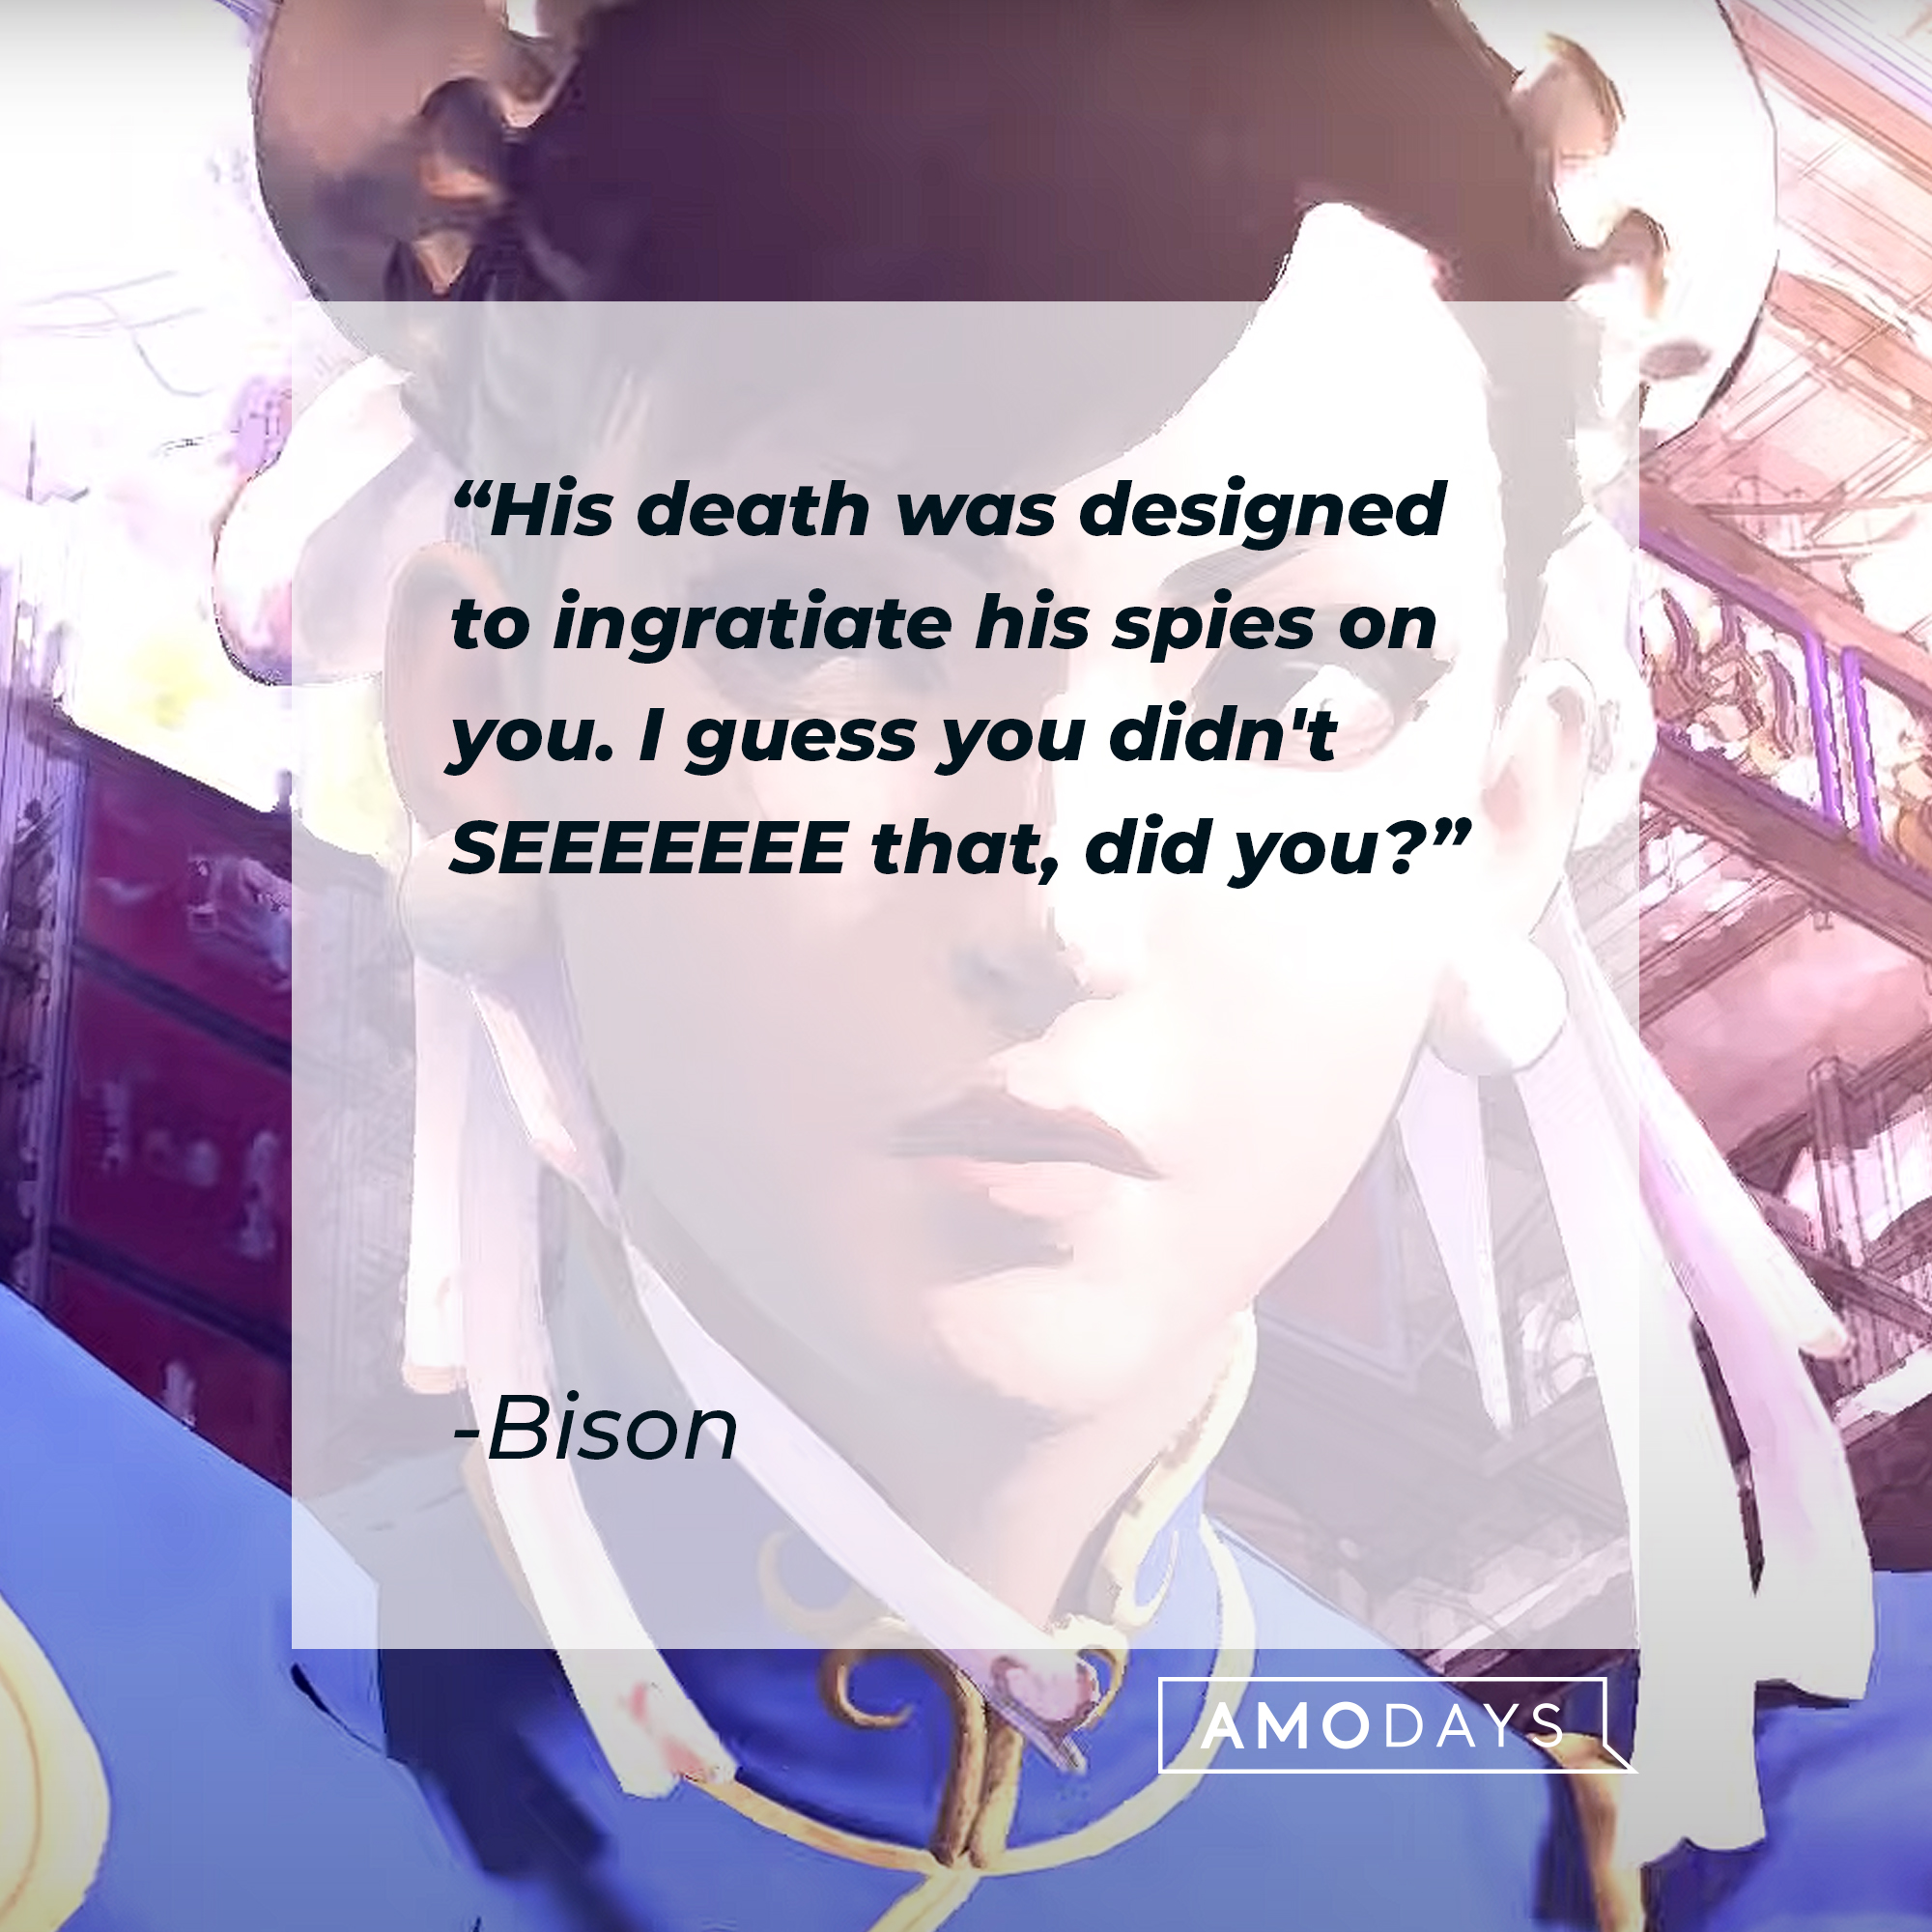 Bison's quote: "His death was designed to ingratiate his spies on you. I guess you didn't SEEEEEEE that, did you?" | Source: youtube.com/PlayStation